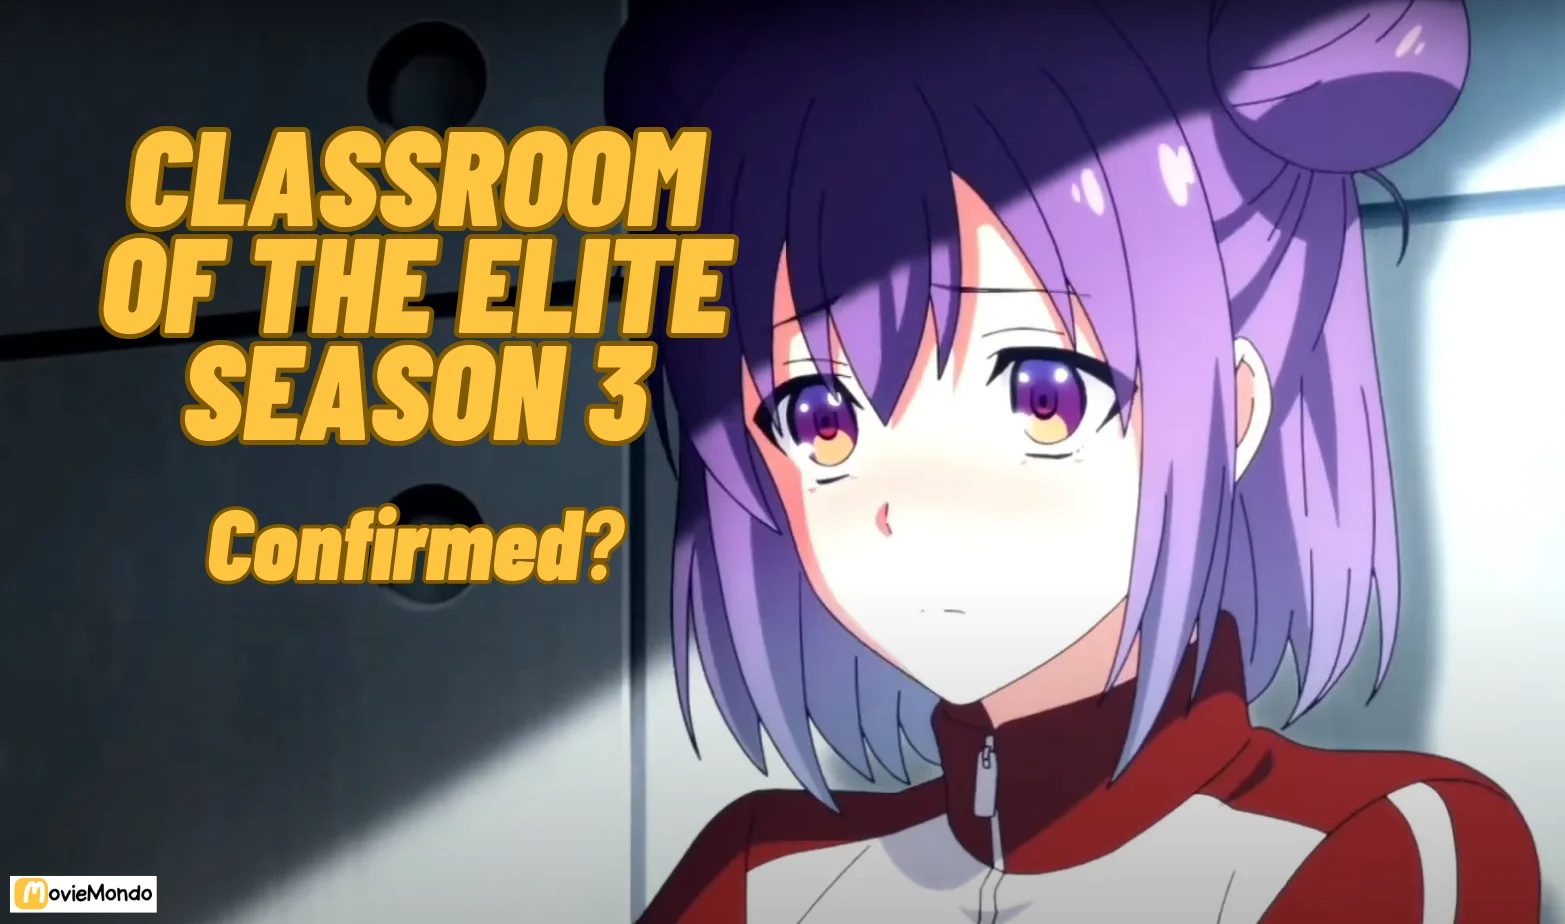 Classroom of the Elite season 3 is scheduled to be released in 2023